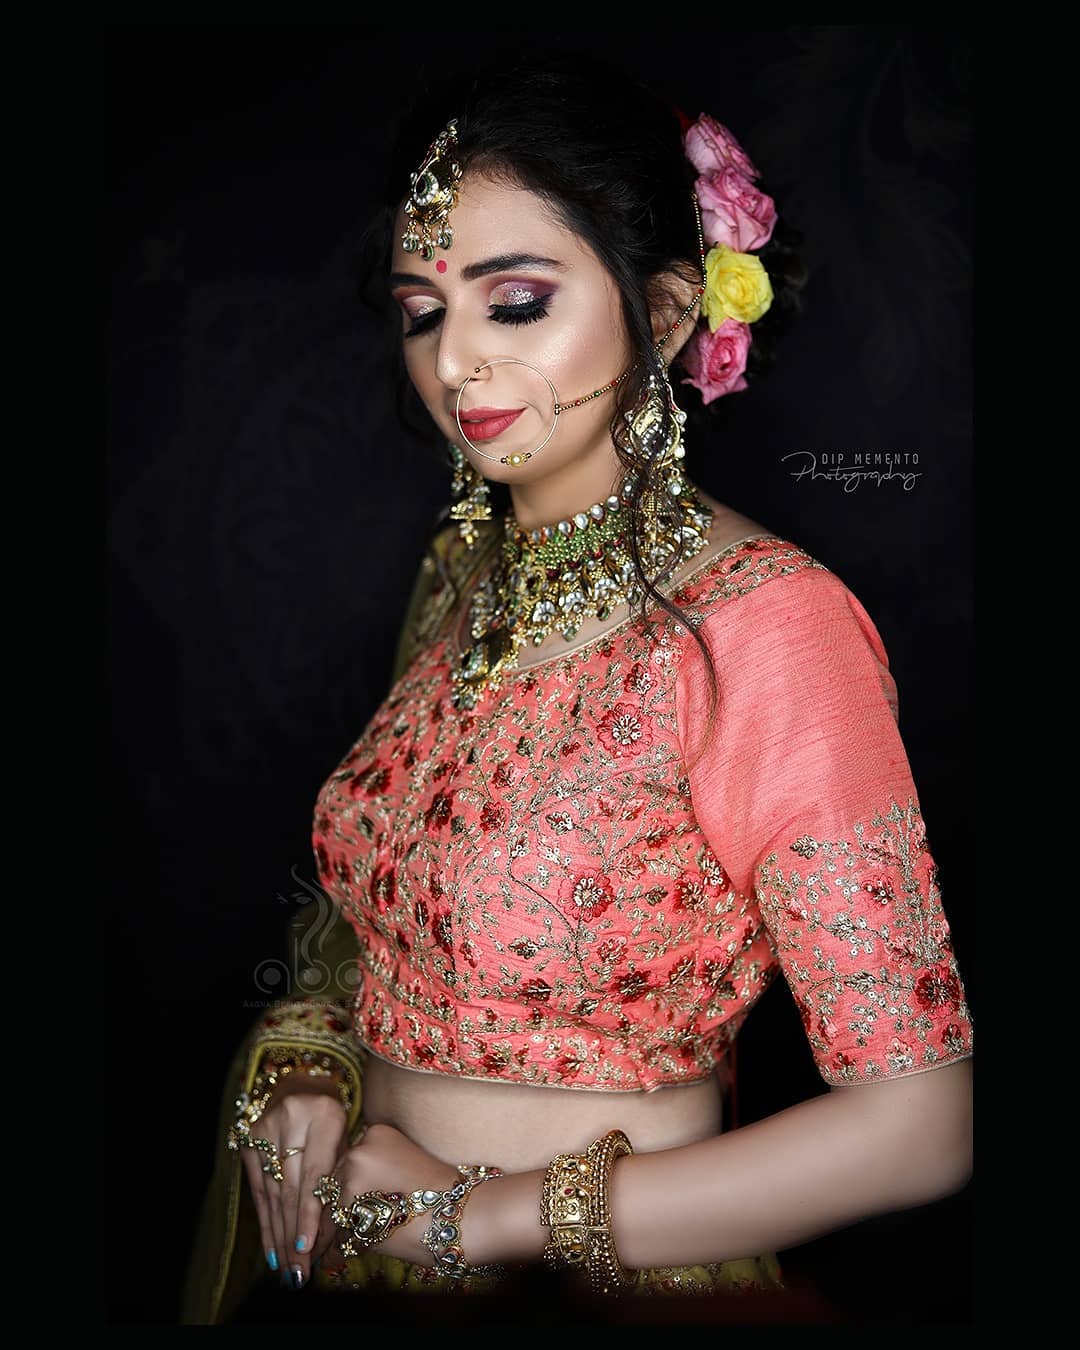 Makeup & Garments shoot..
.
.
Makeover by @_aagna_beauty_care_
Tieup:  @studio_a_the_family_salon
Click & Retouch by :@dip_memento_photography
Assist: @ll_ii_mr.tendulkar_ii_ll
Model : @vedvisoni_official
Outfit: Eva Designers
Support & help: @ashish.kotadiya.75
.
.
#beautiful #bride #PHOTOGRAPHY  #dipmementophotography  #beauty #9924227745 #bridetobe #bridesofindia #bridehairstyle #bridestyle #bridestory #bridesessentials #brideinspo #brideinspiration #wedding #weddingphotography #weddingdress #weddinginspiration #weddingideas #weddingphotographer #weddingplanner #weddingdiaries #weddingbrigade #weddingbride #indianwedding #photography #weddingwows  #photoshoot #weddingwire